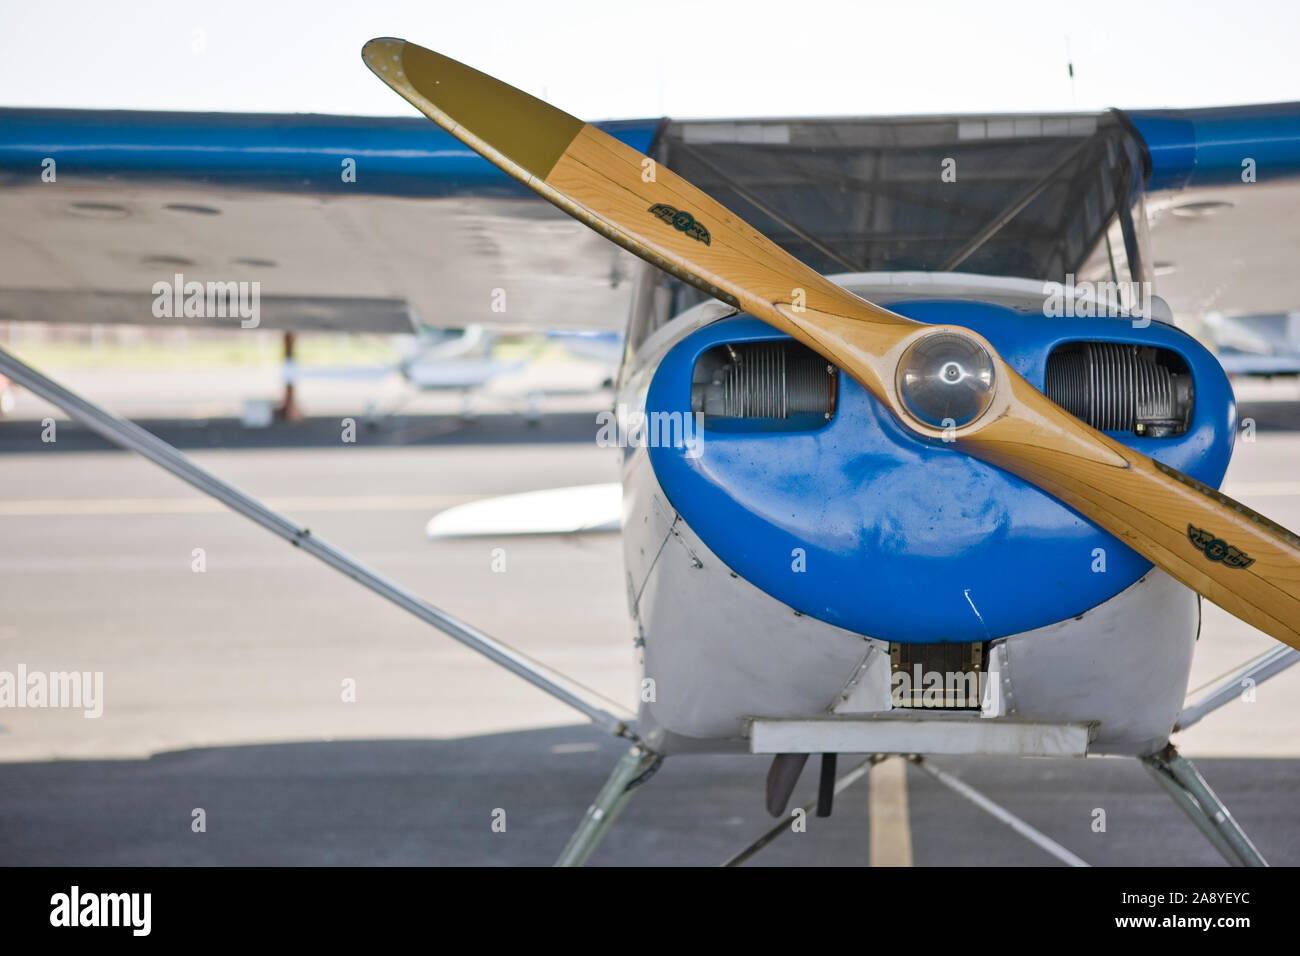 Propeller on a vintage aircraft sitting stationary on an airport tarmac outdoors in the sunshine. Stock Photo